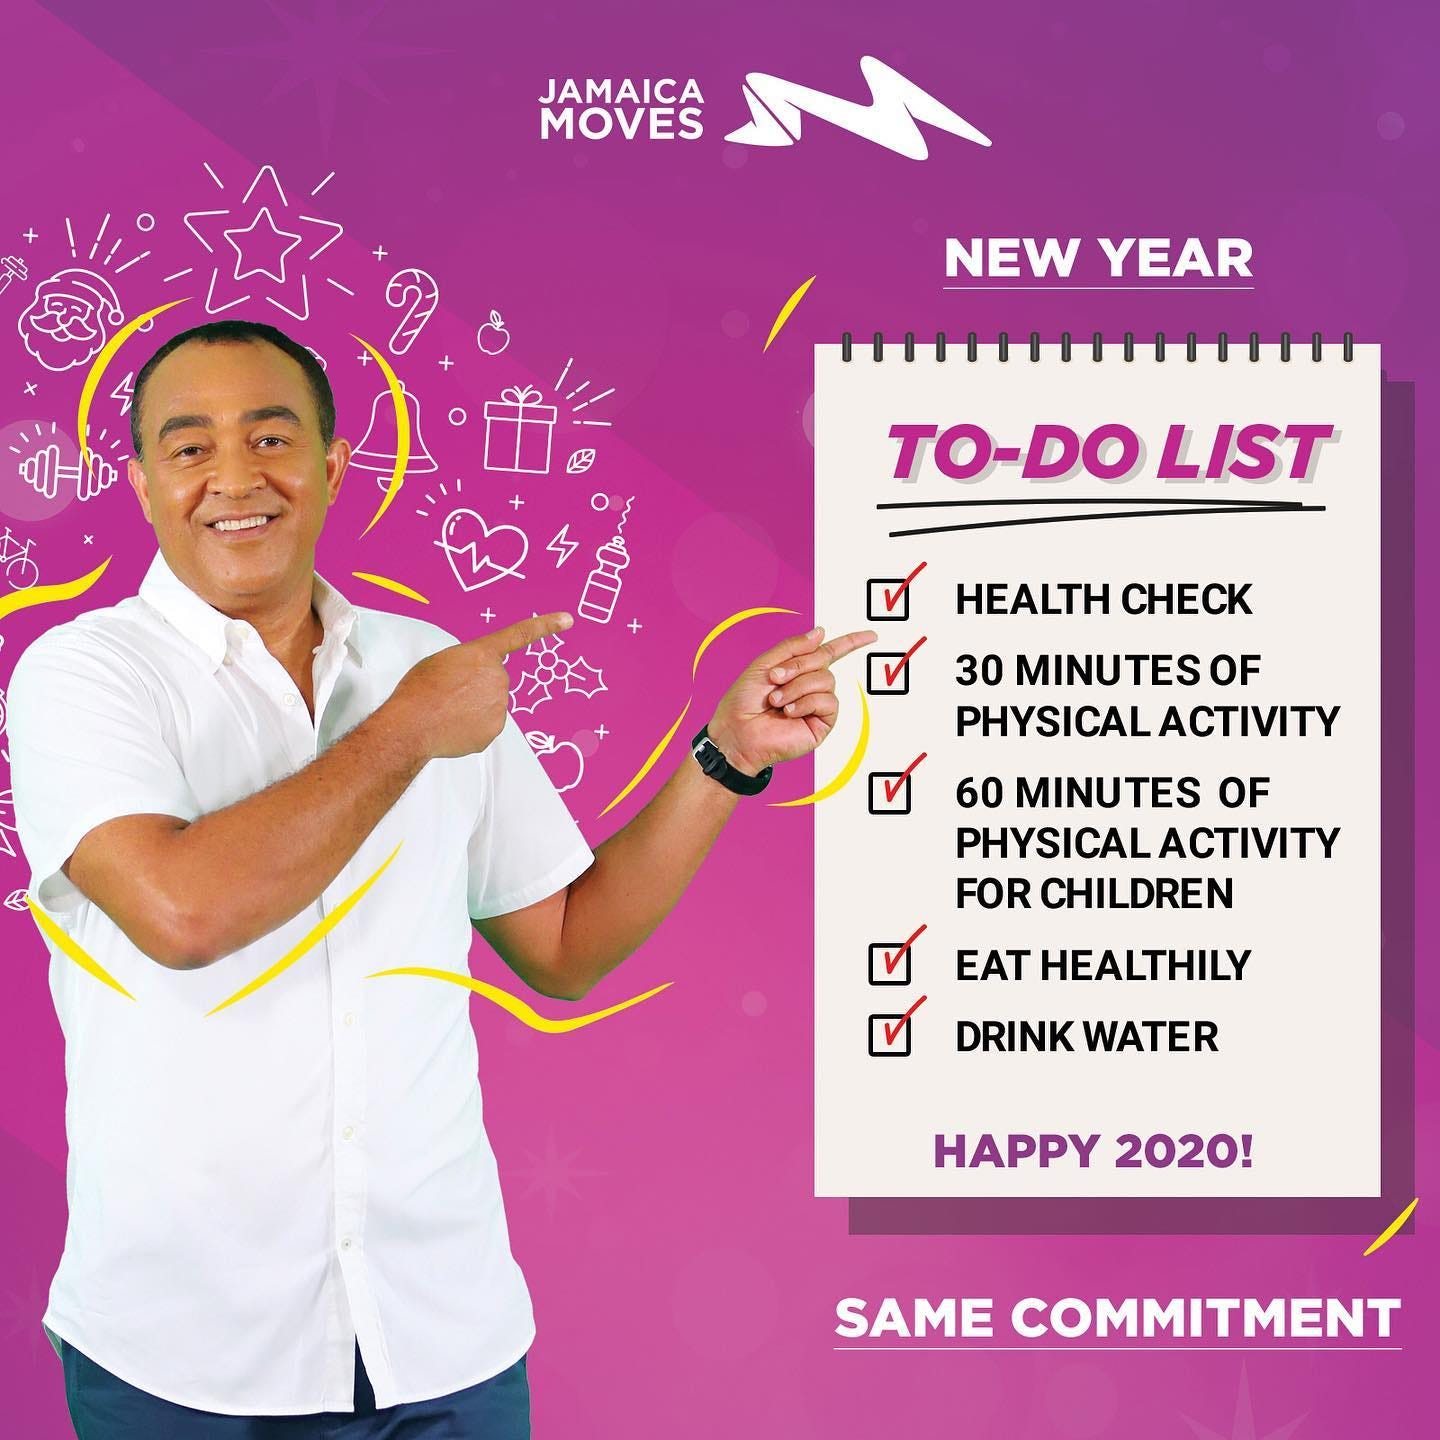 May be an image of 1 person, smiling and text that says 'JAMAICA MOVES NEW YEAR 에요 TO-DO LIST √ HEALTH CHECK 30 MINUTESF PHYSICALACTIVITY 60 MINUTES OF PHYSICALACTIVIT FOR CHILDREN EAT HEALTHILY DRIWATER HAPPY 2020! SAME COMMITMENT'